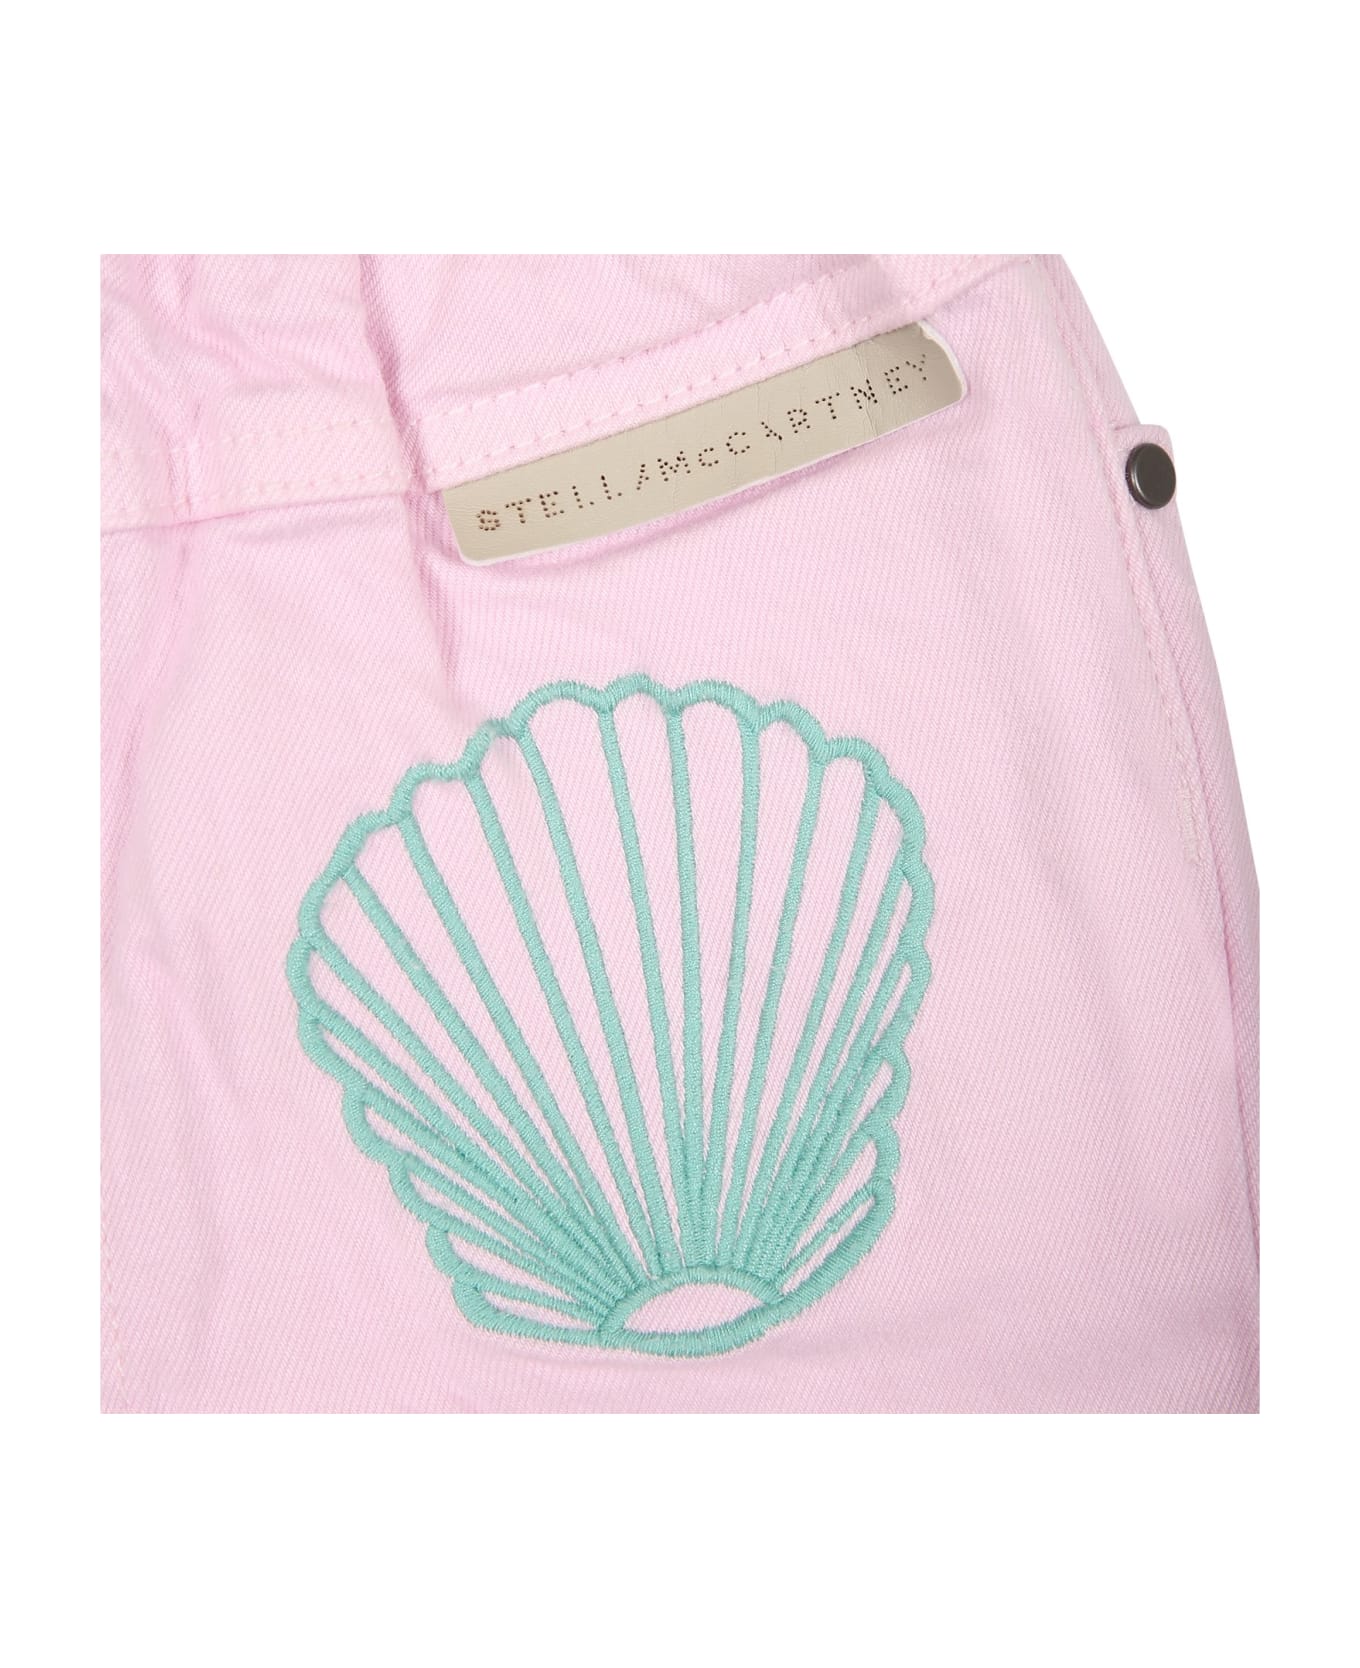 Stella McCartney Kids Pink Jeans For Baby Girl With Shells - Pink